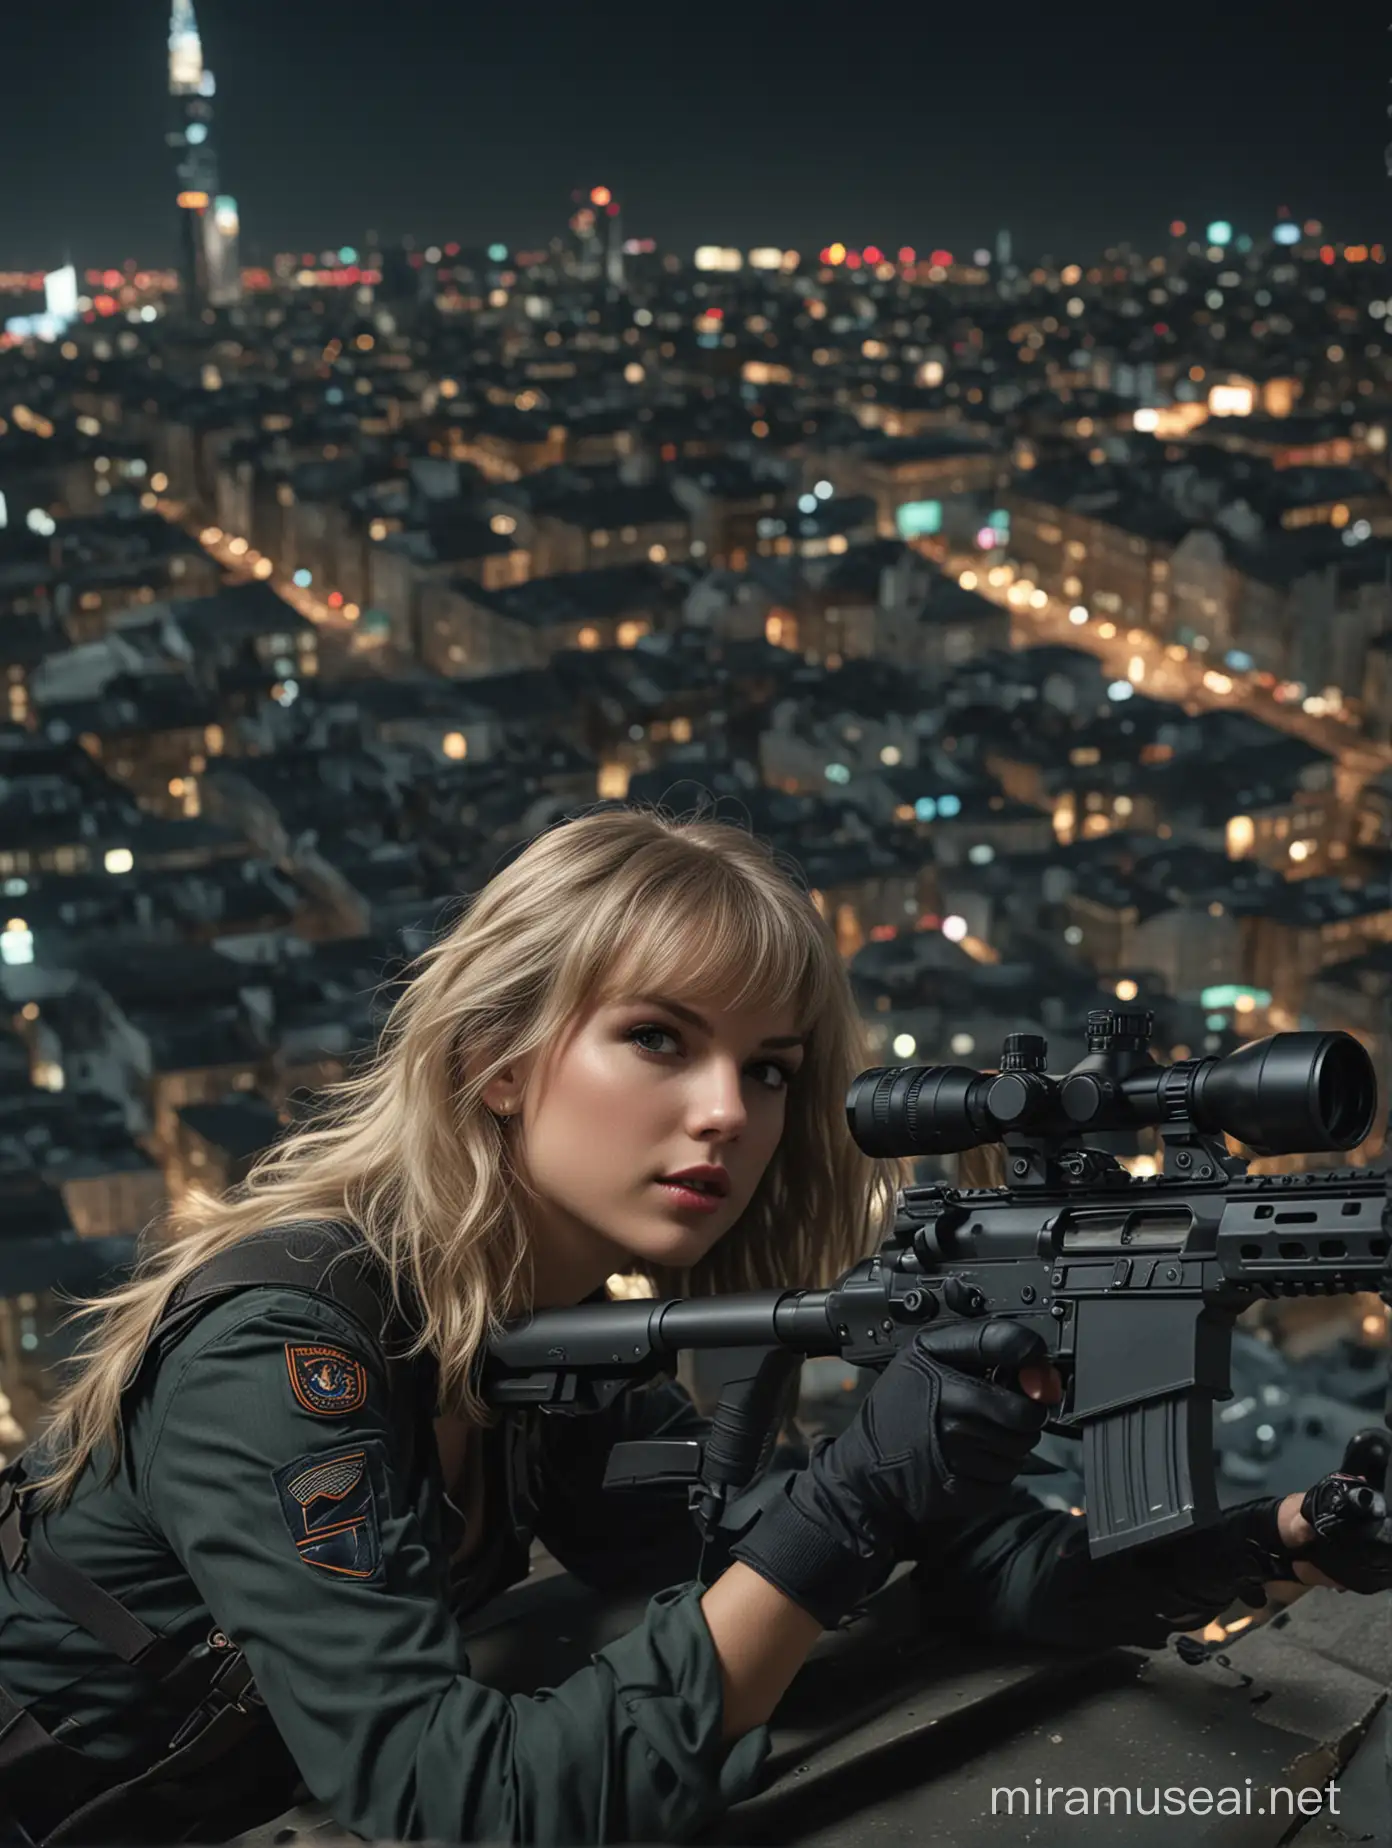 A beautiful Taylor swift, assassin with jet blonde hair lying down in a prone position, targeting an enemy in the distance with a long-range sniper rifle. She is on the rooftop of the city center looking down on a populated marketplace at night, with ambient lights from buildings and the city. The scene features a highly detailed city with a cinematic 8k UHD ProRes color-graded professional look and feel, providing amazing quality. The perspective is over the shoulder.